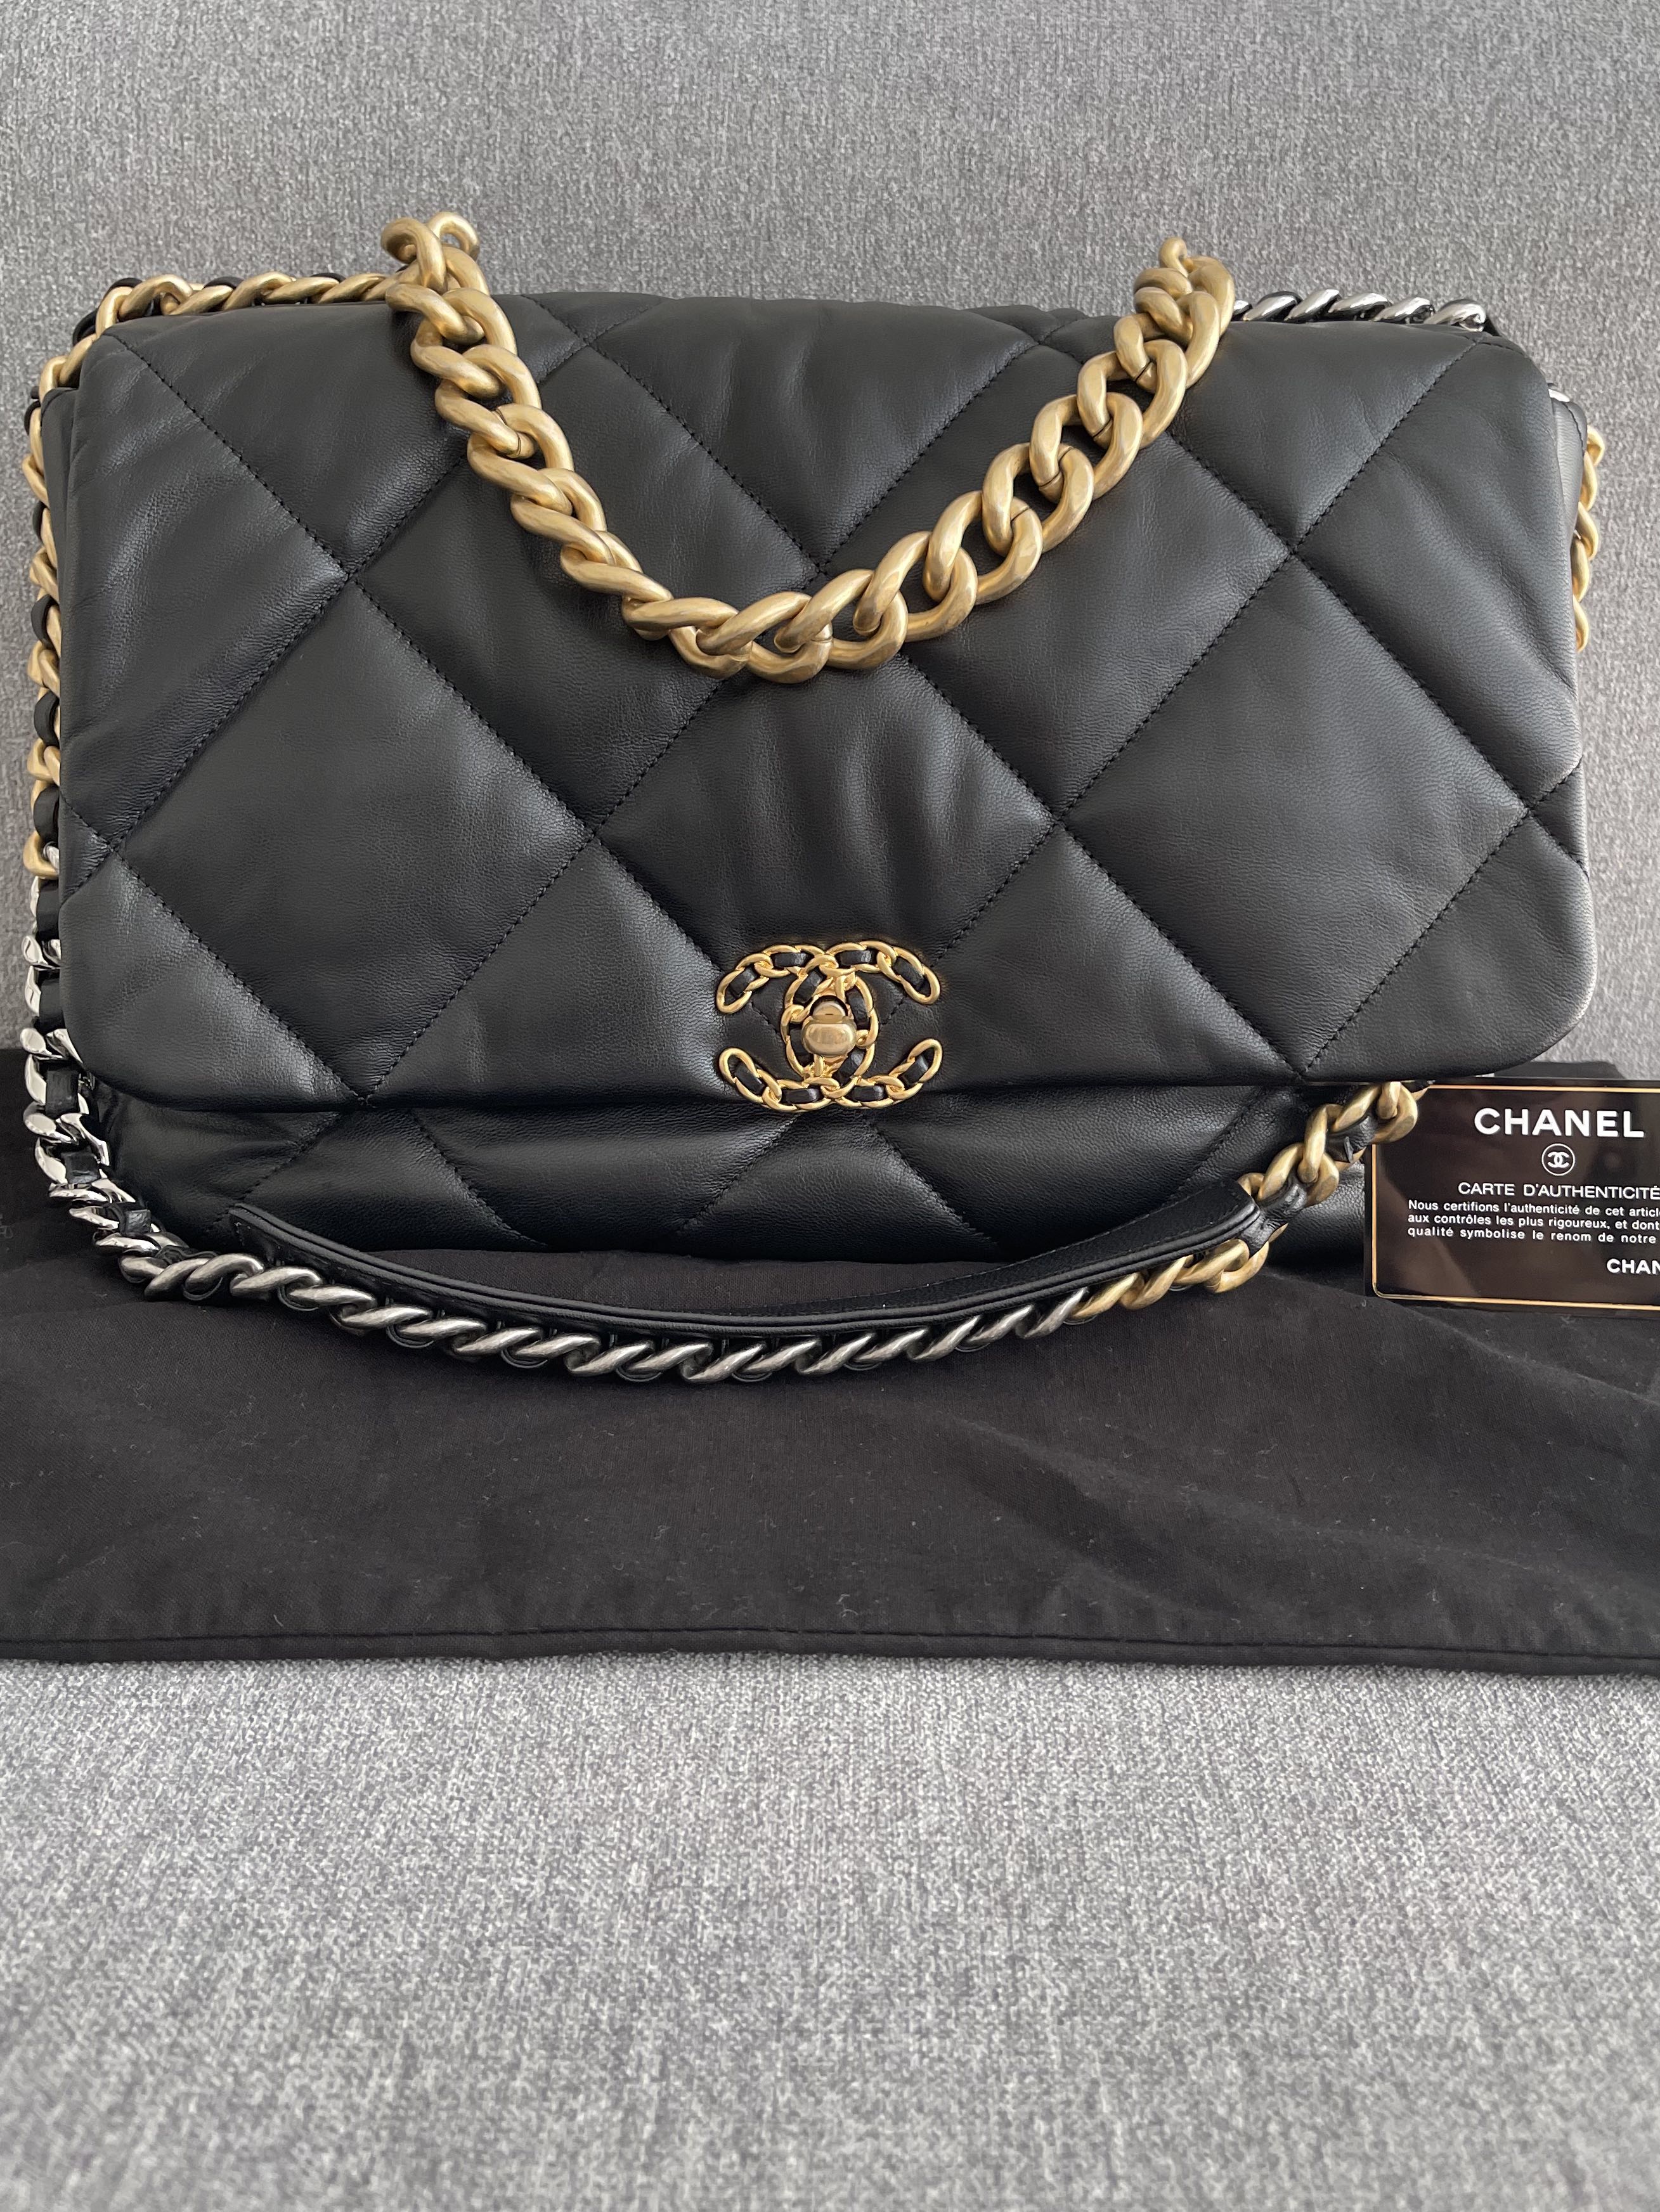 CHANEL 19 Bag in Large. Lambskin Leather in Gold-Tone, Silver